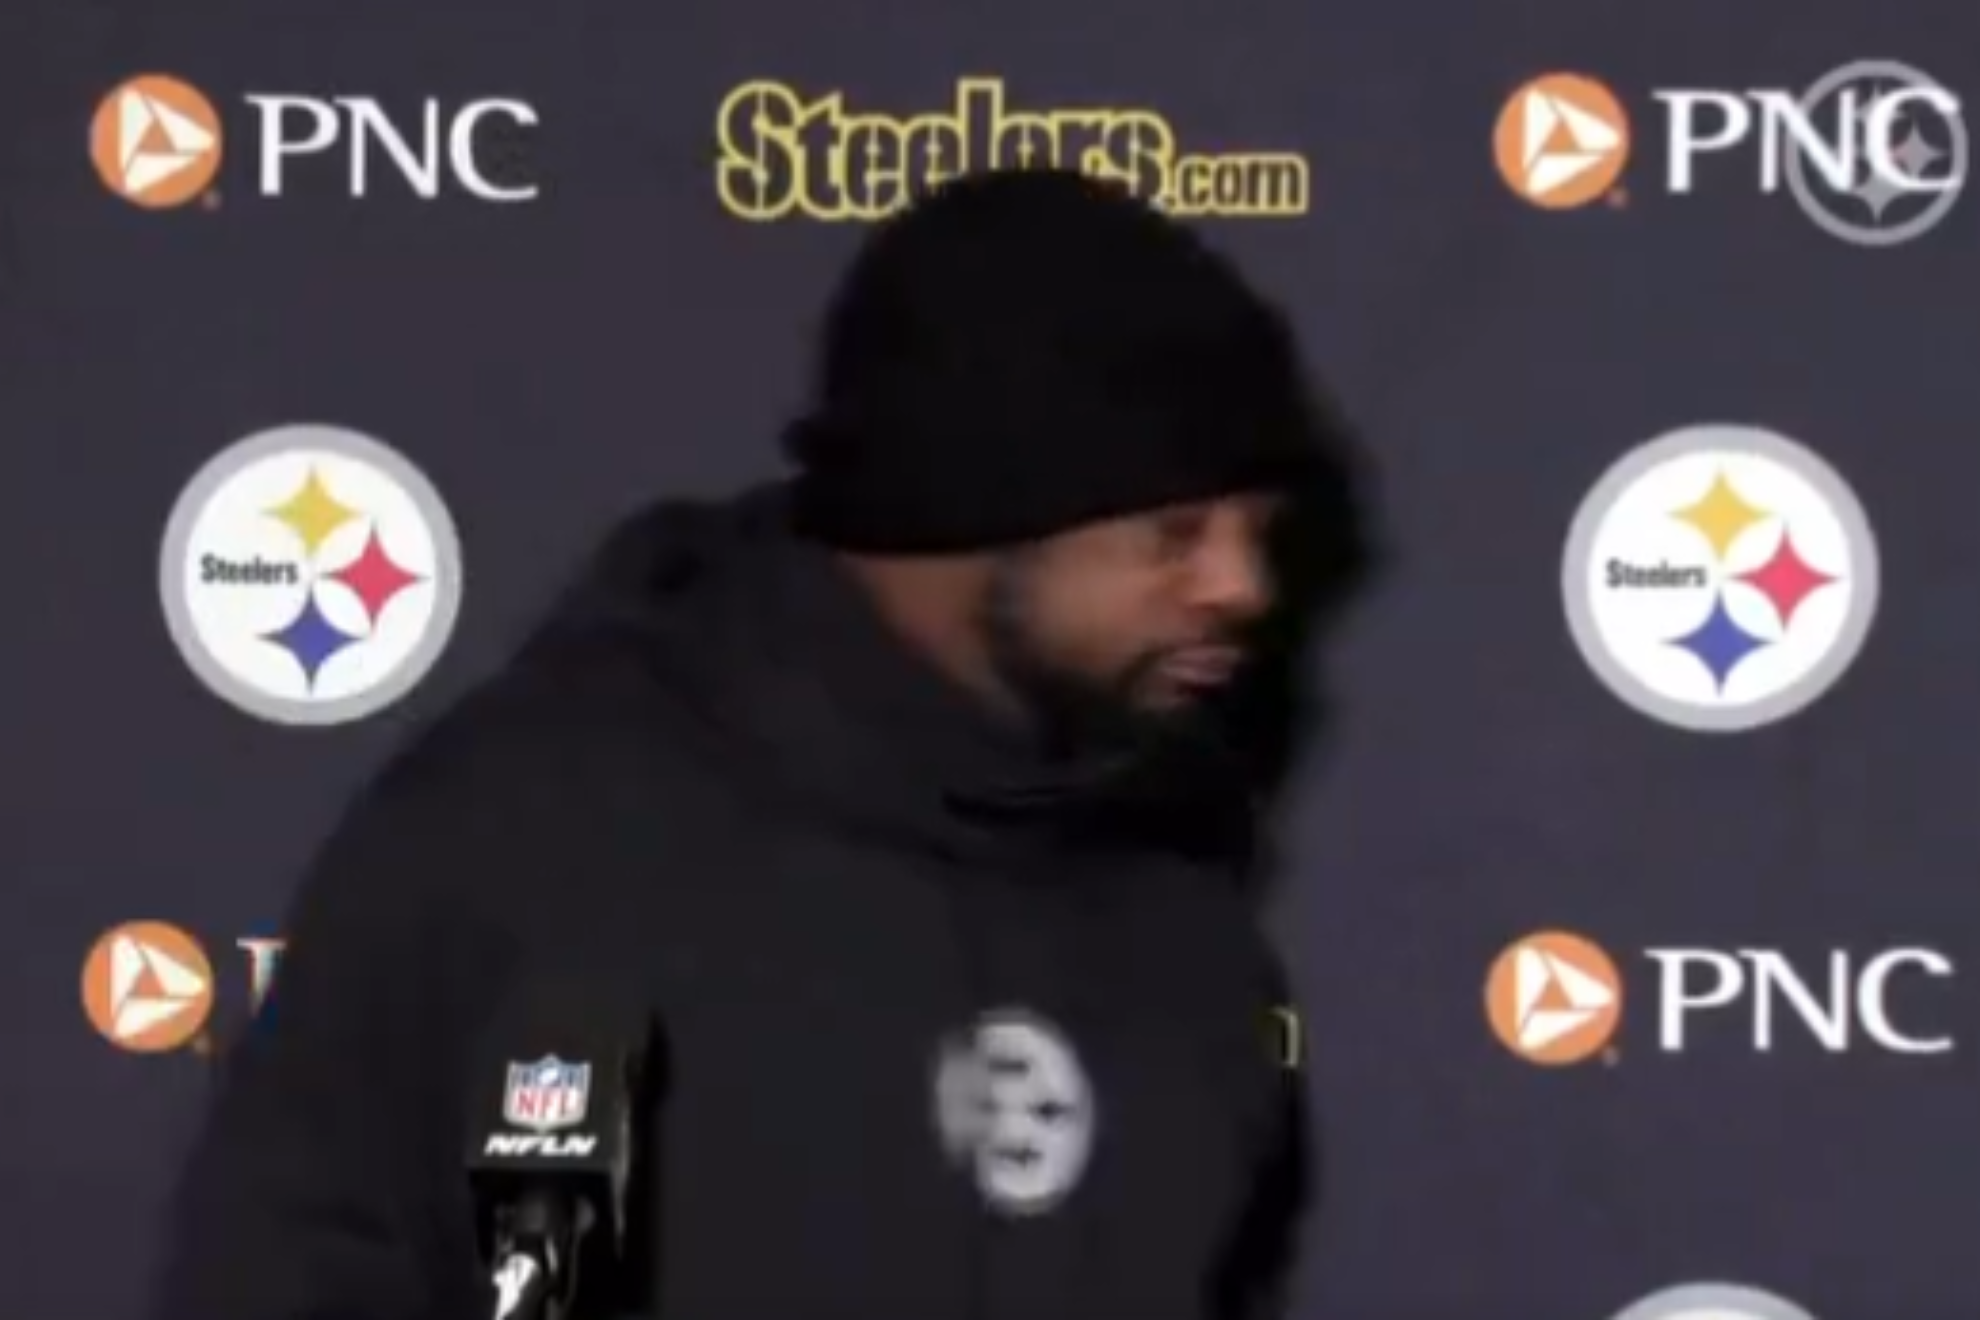 Tomlin walked out of his press conference mid-question.